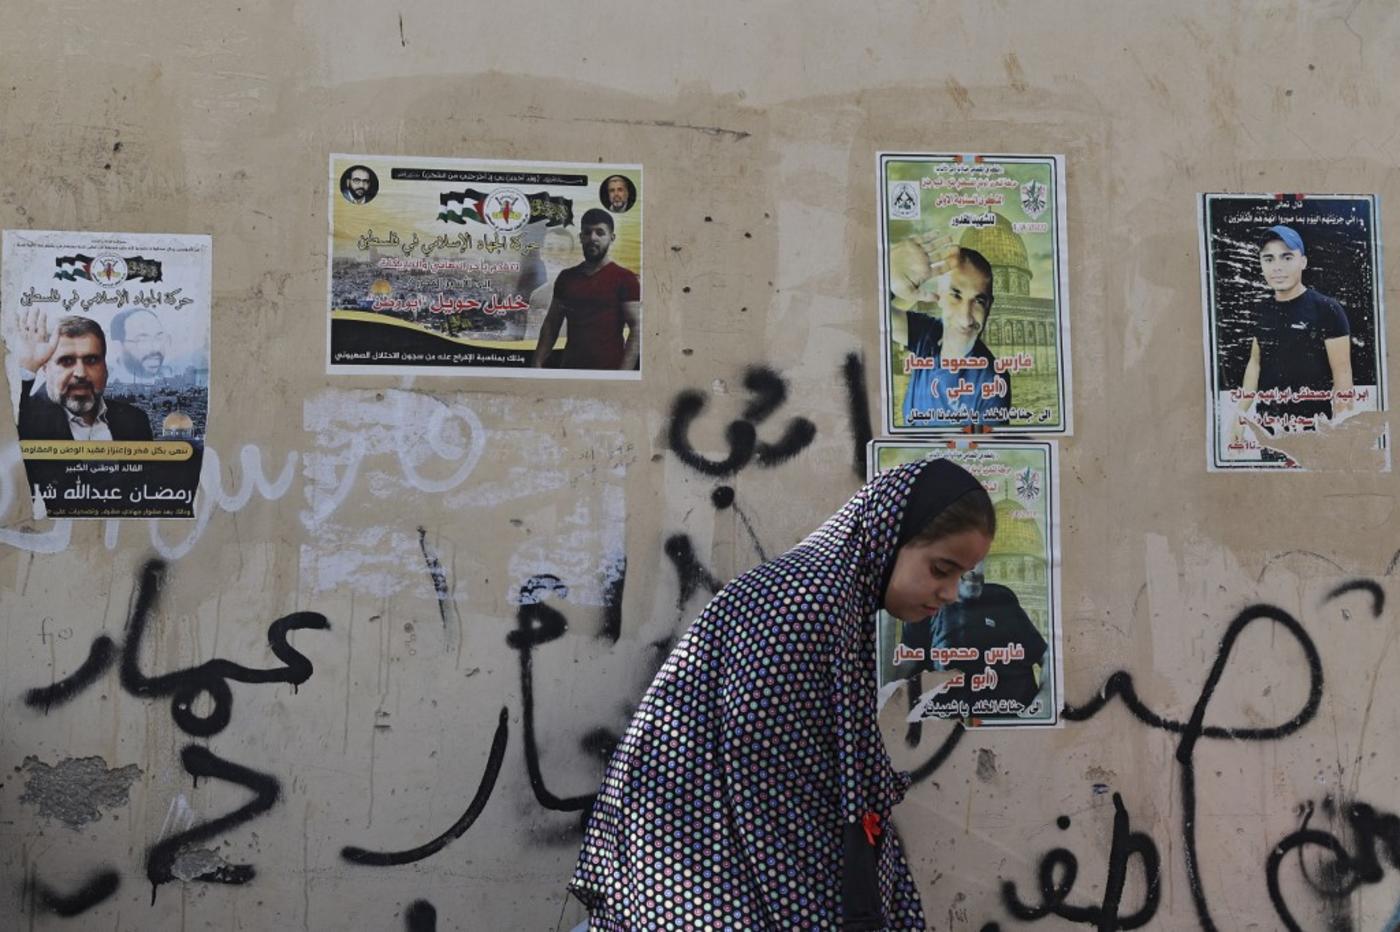 Posters of Palestinian martyrs and prisoners are plastered all over in Jenin refugee camp. (Afp)